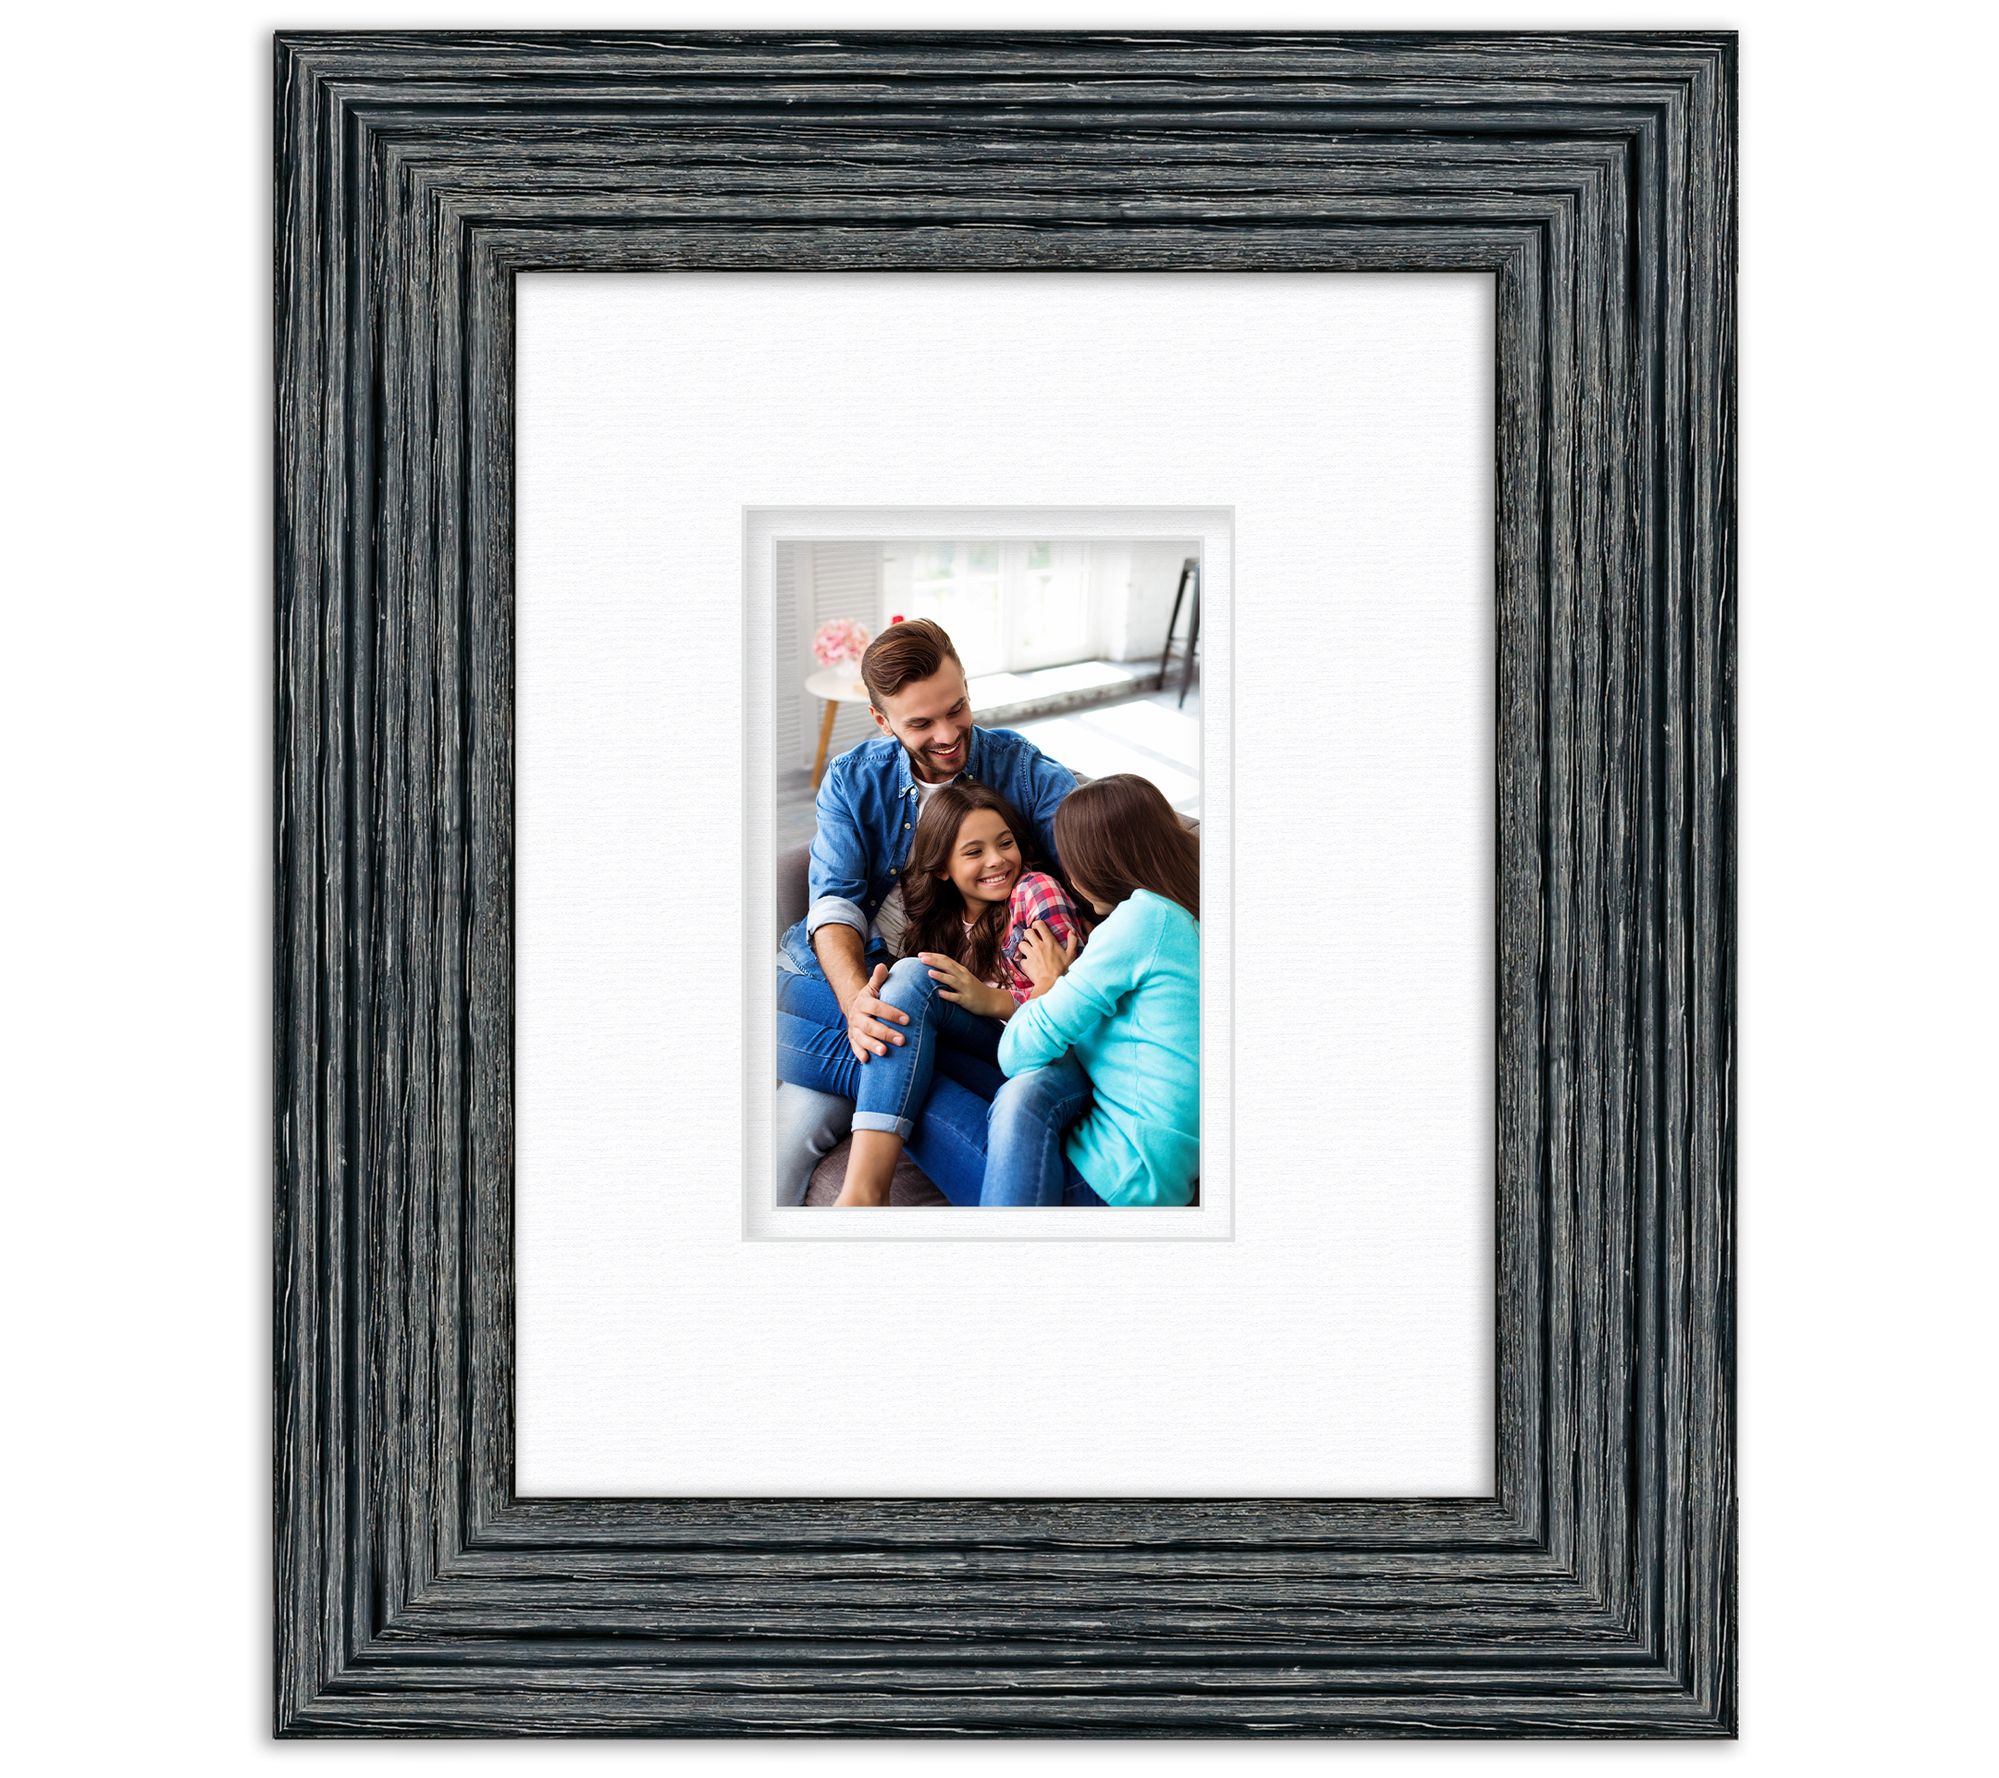 Rustic Signature Picture Frame with Fountain Blue Mat 5x7